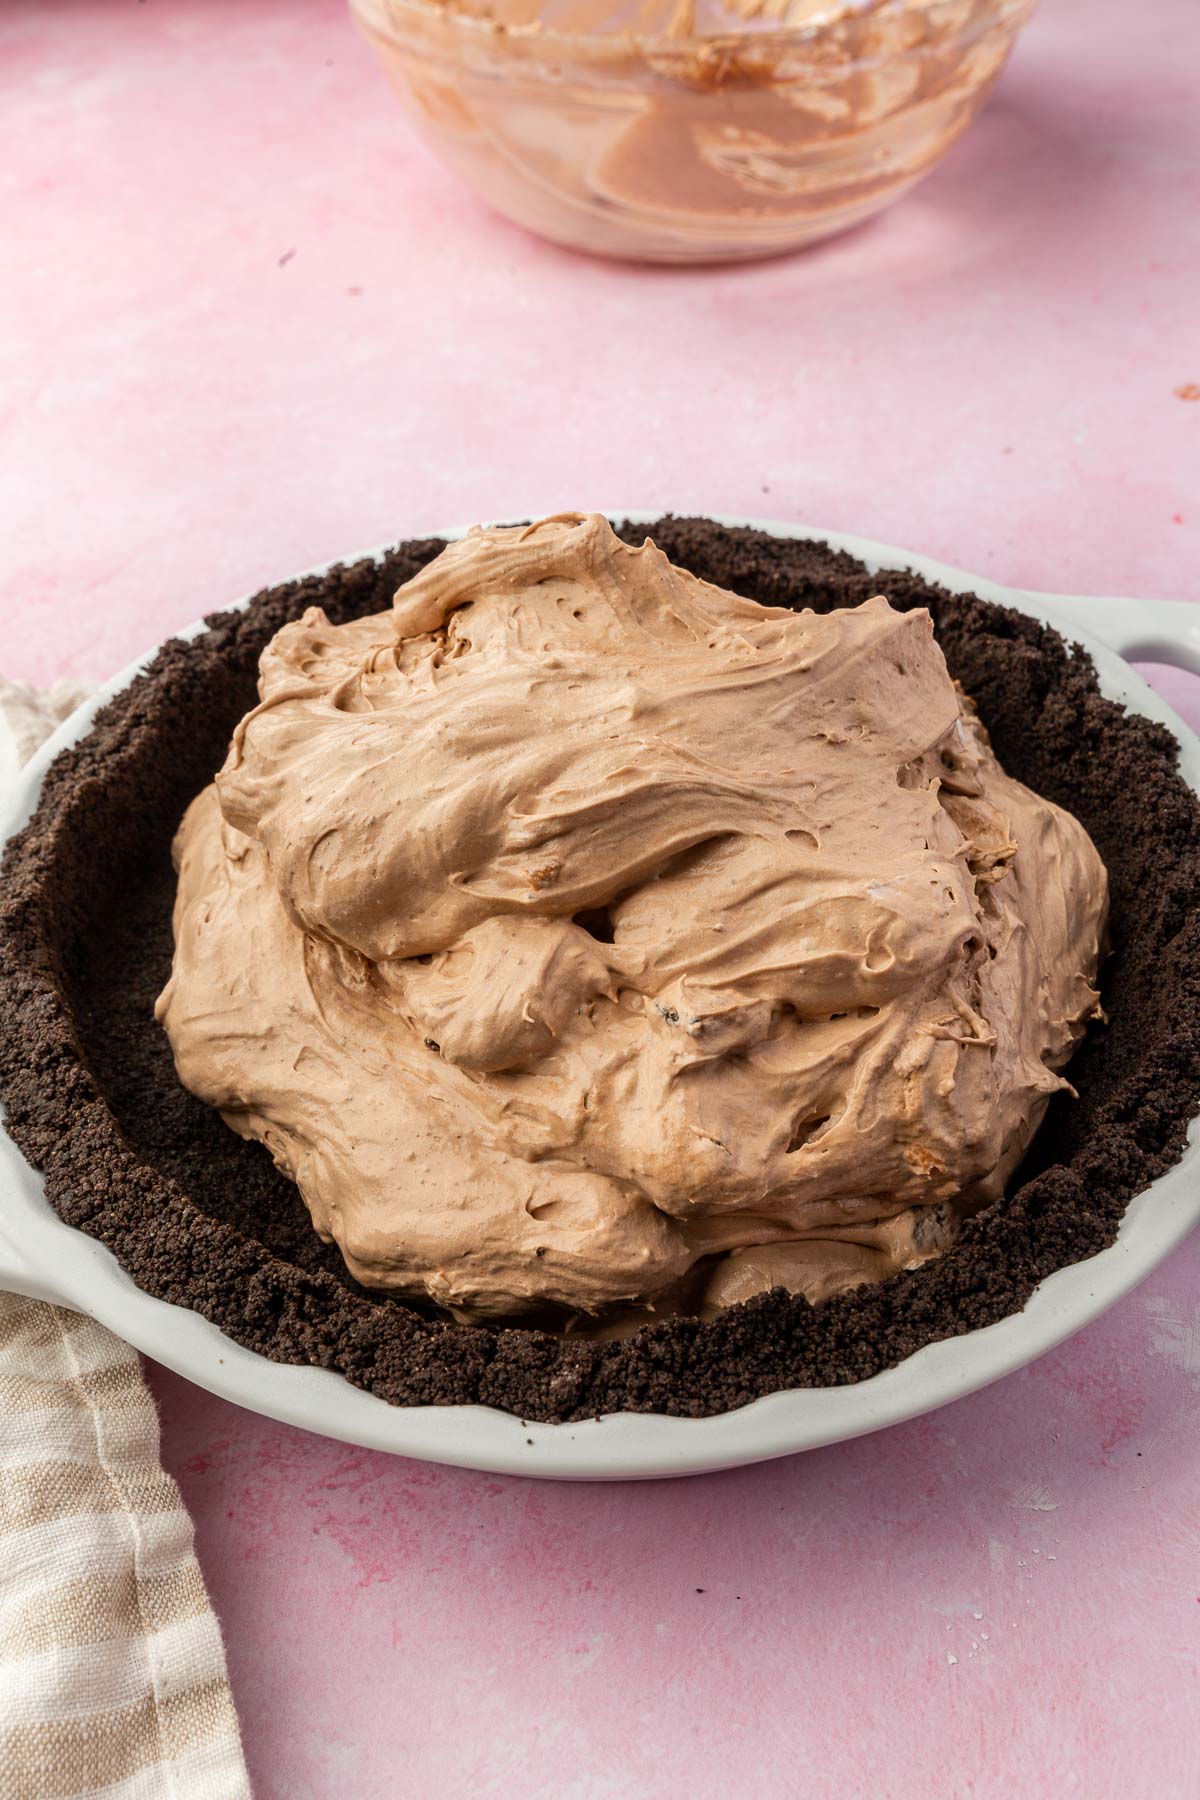 A chocolate whipped cream mixture spread onto a gluten-free Oreo pie crust in a white tart pan.